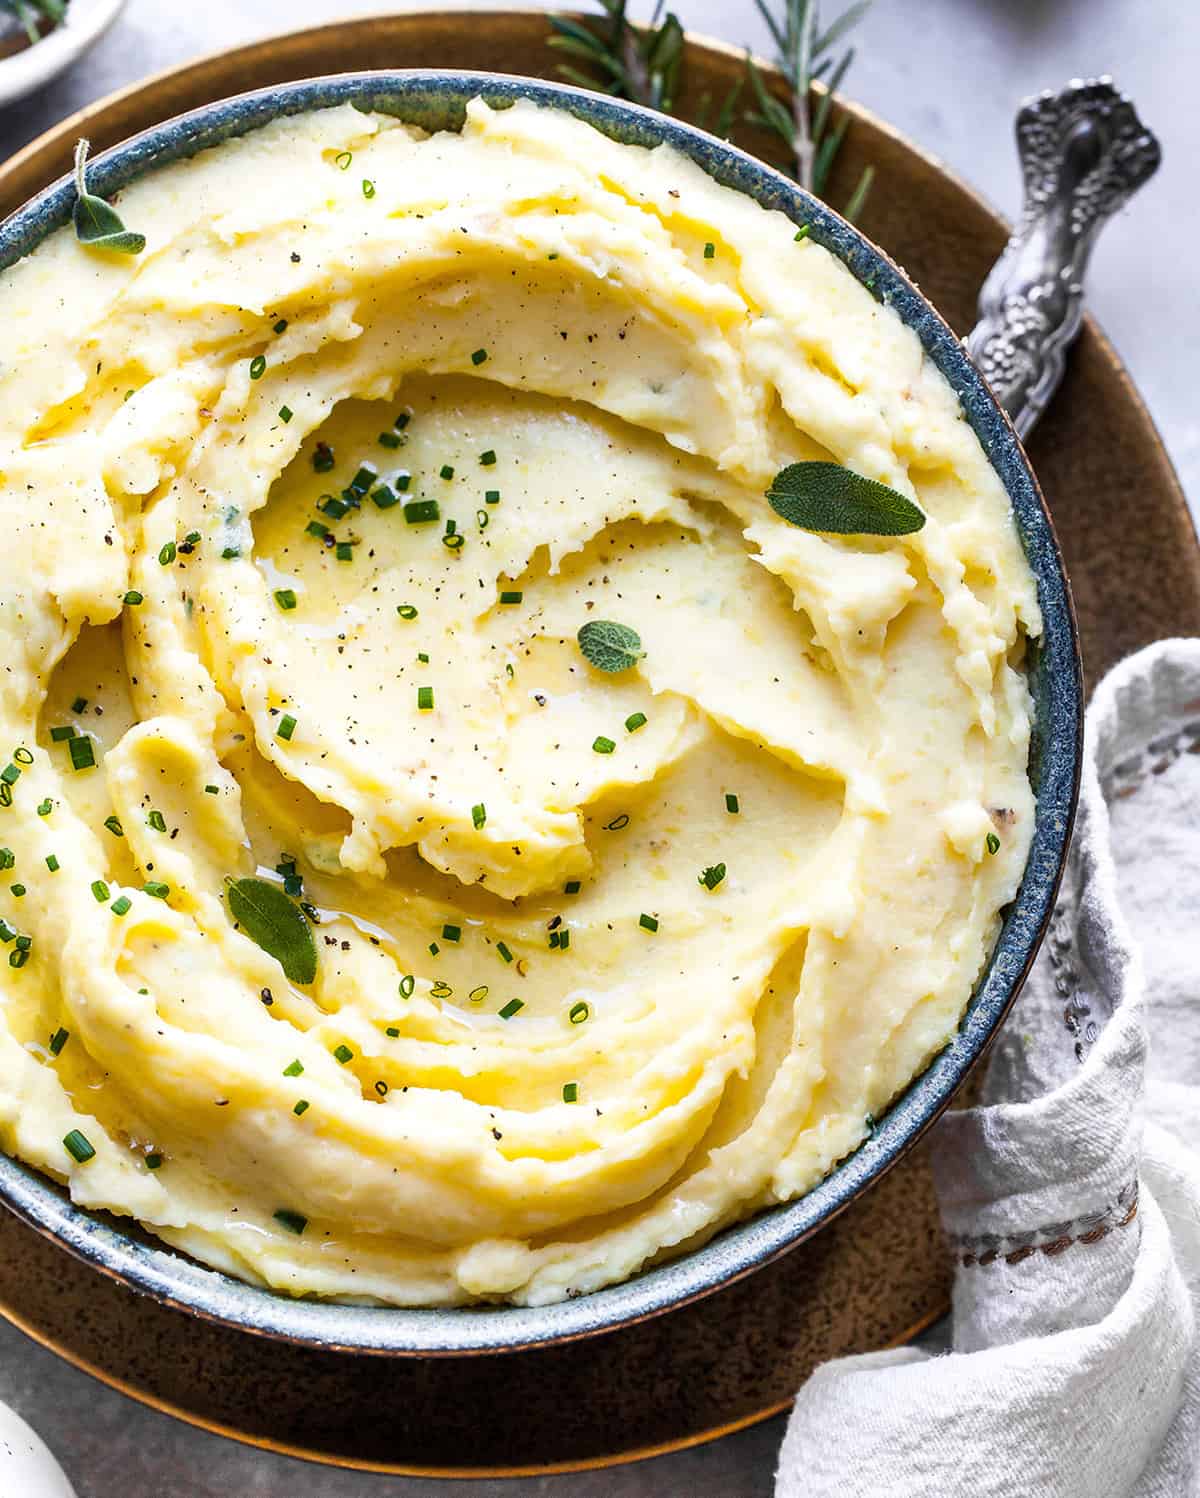 Best Mashed Potatoes Recipe in a serving bowl topped with butter and herbs